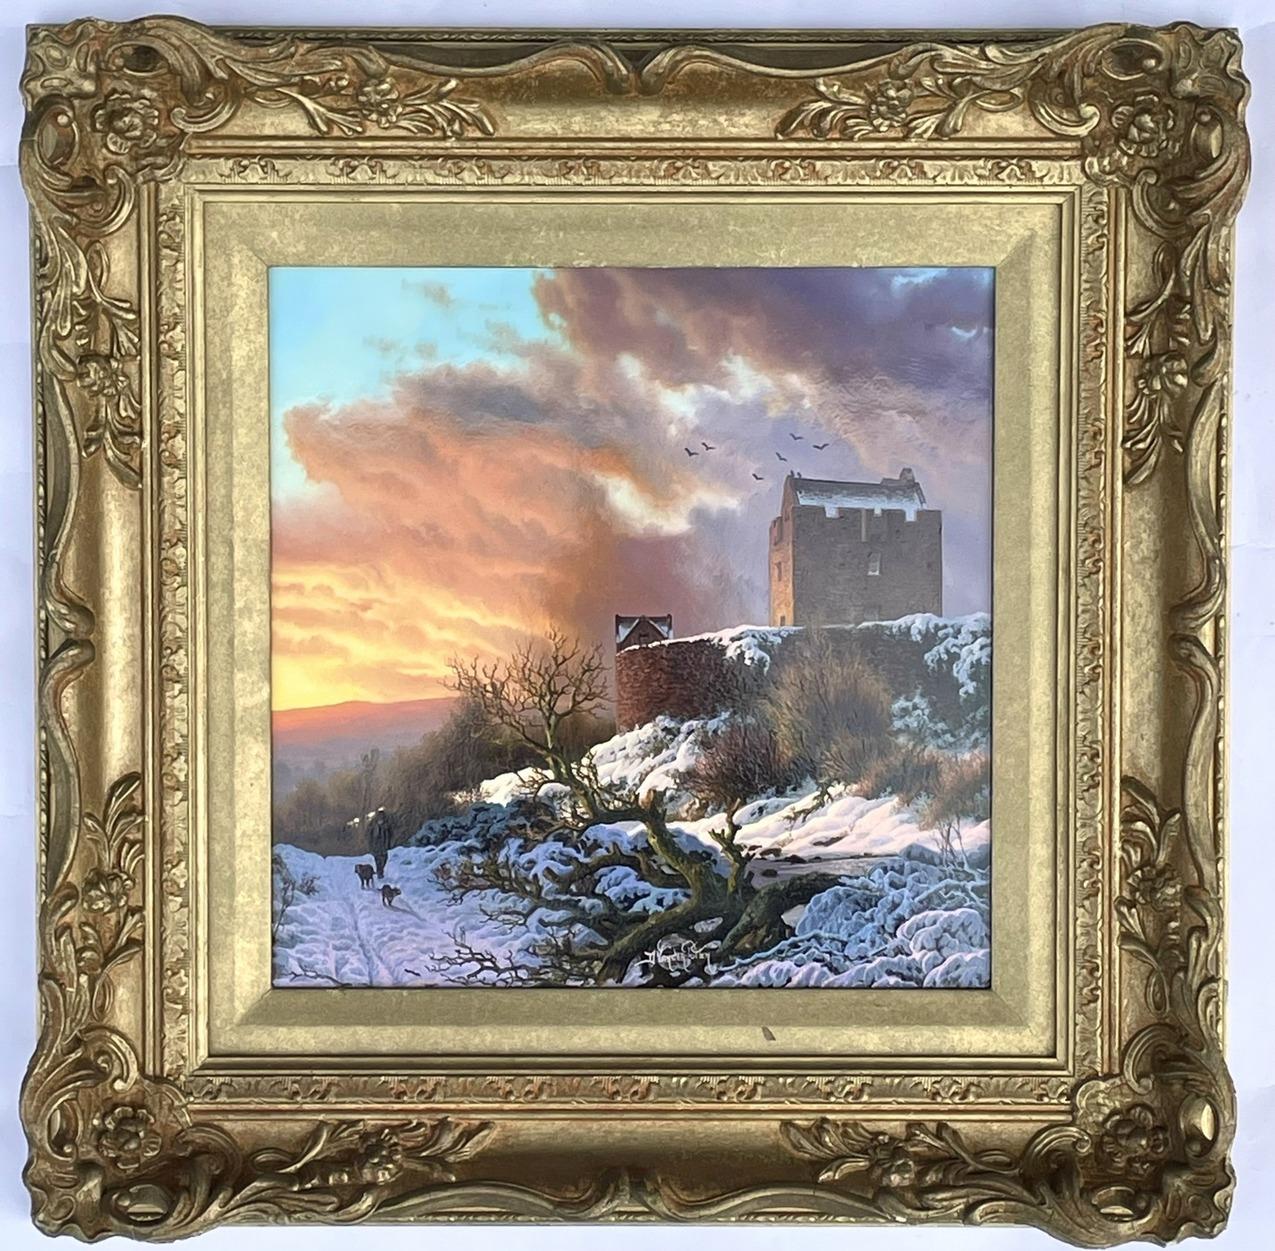 Superb traditional oil painting by living Artist Daniel Van der Putten, depicting an Irish rural snow scene near Kinvara in County Galway, a view of a Sixteenth Century Irish Castle known as Dunguaire Castle at the end of a snow filled winding dirt